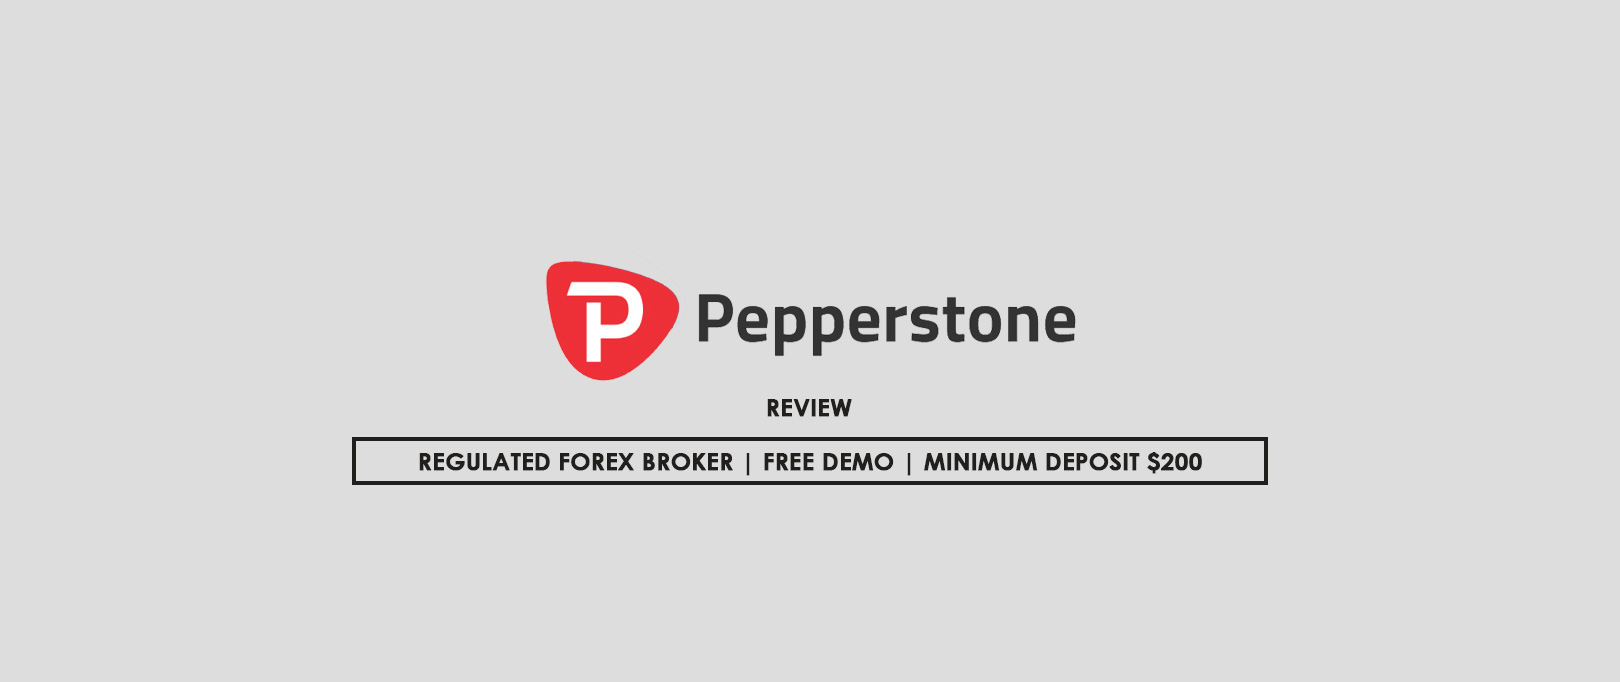 Pepperstone forex review